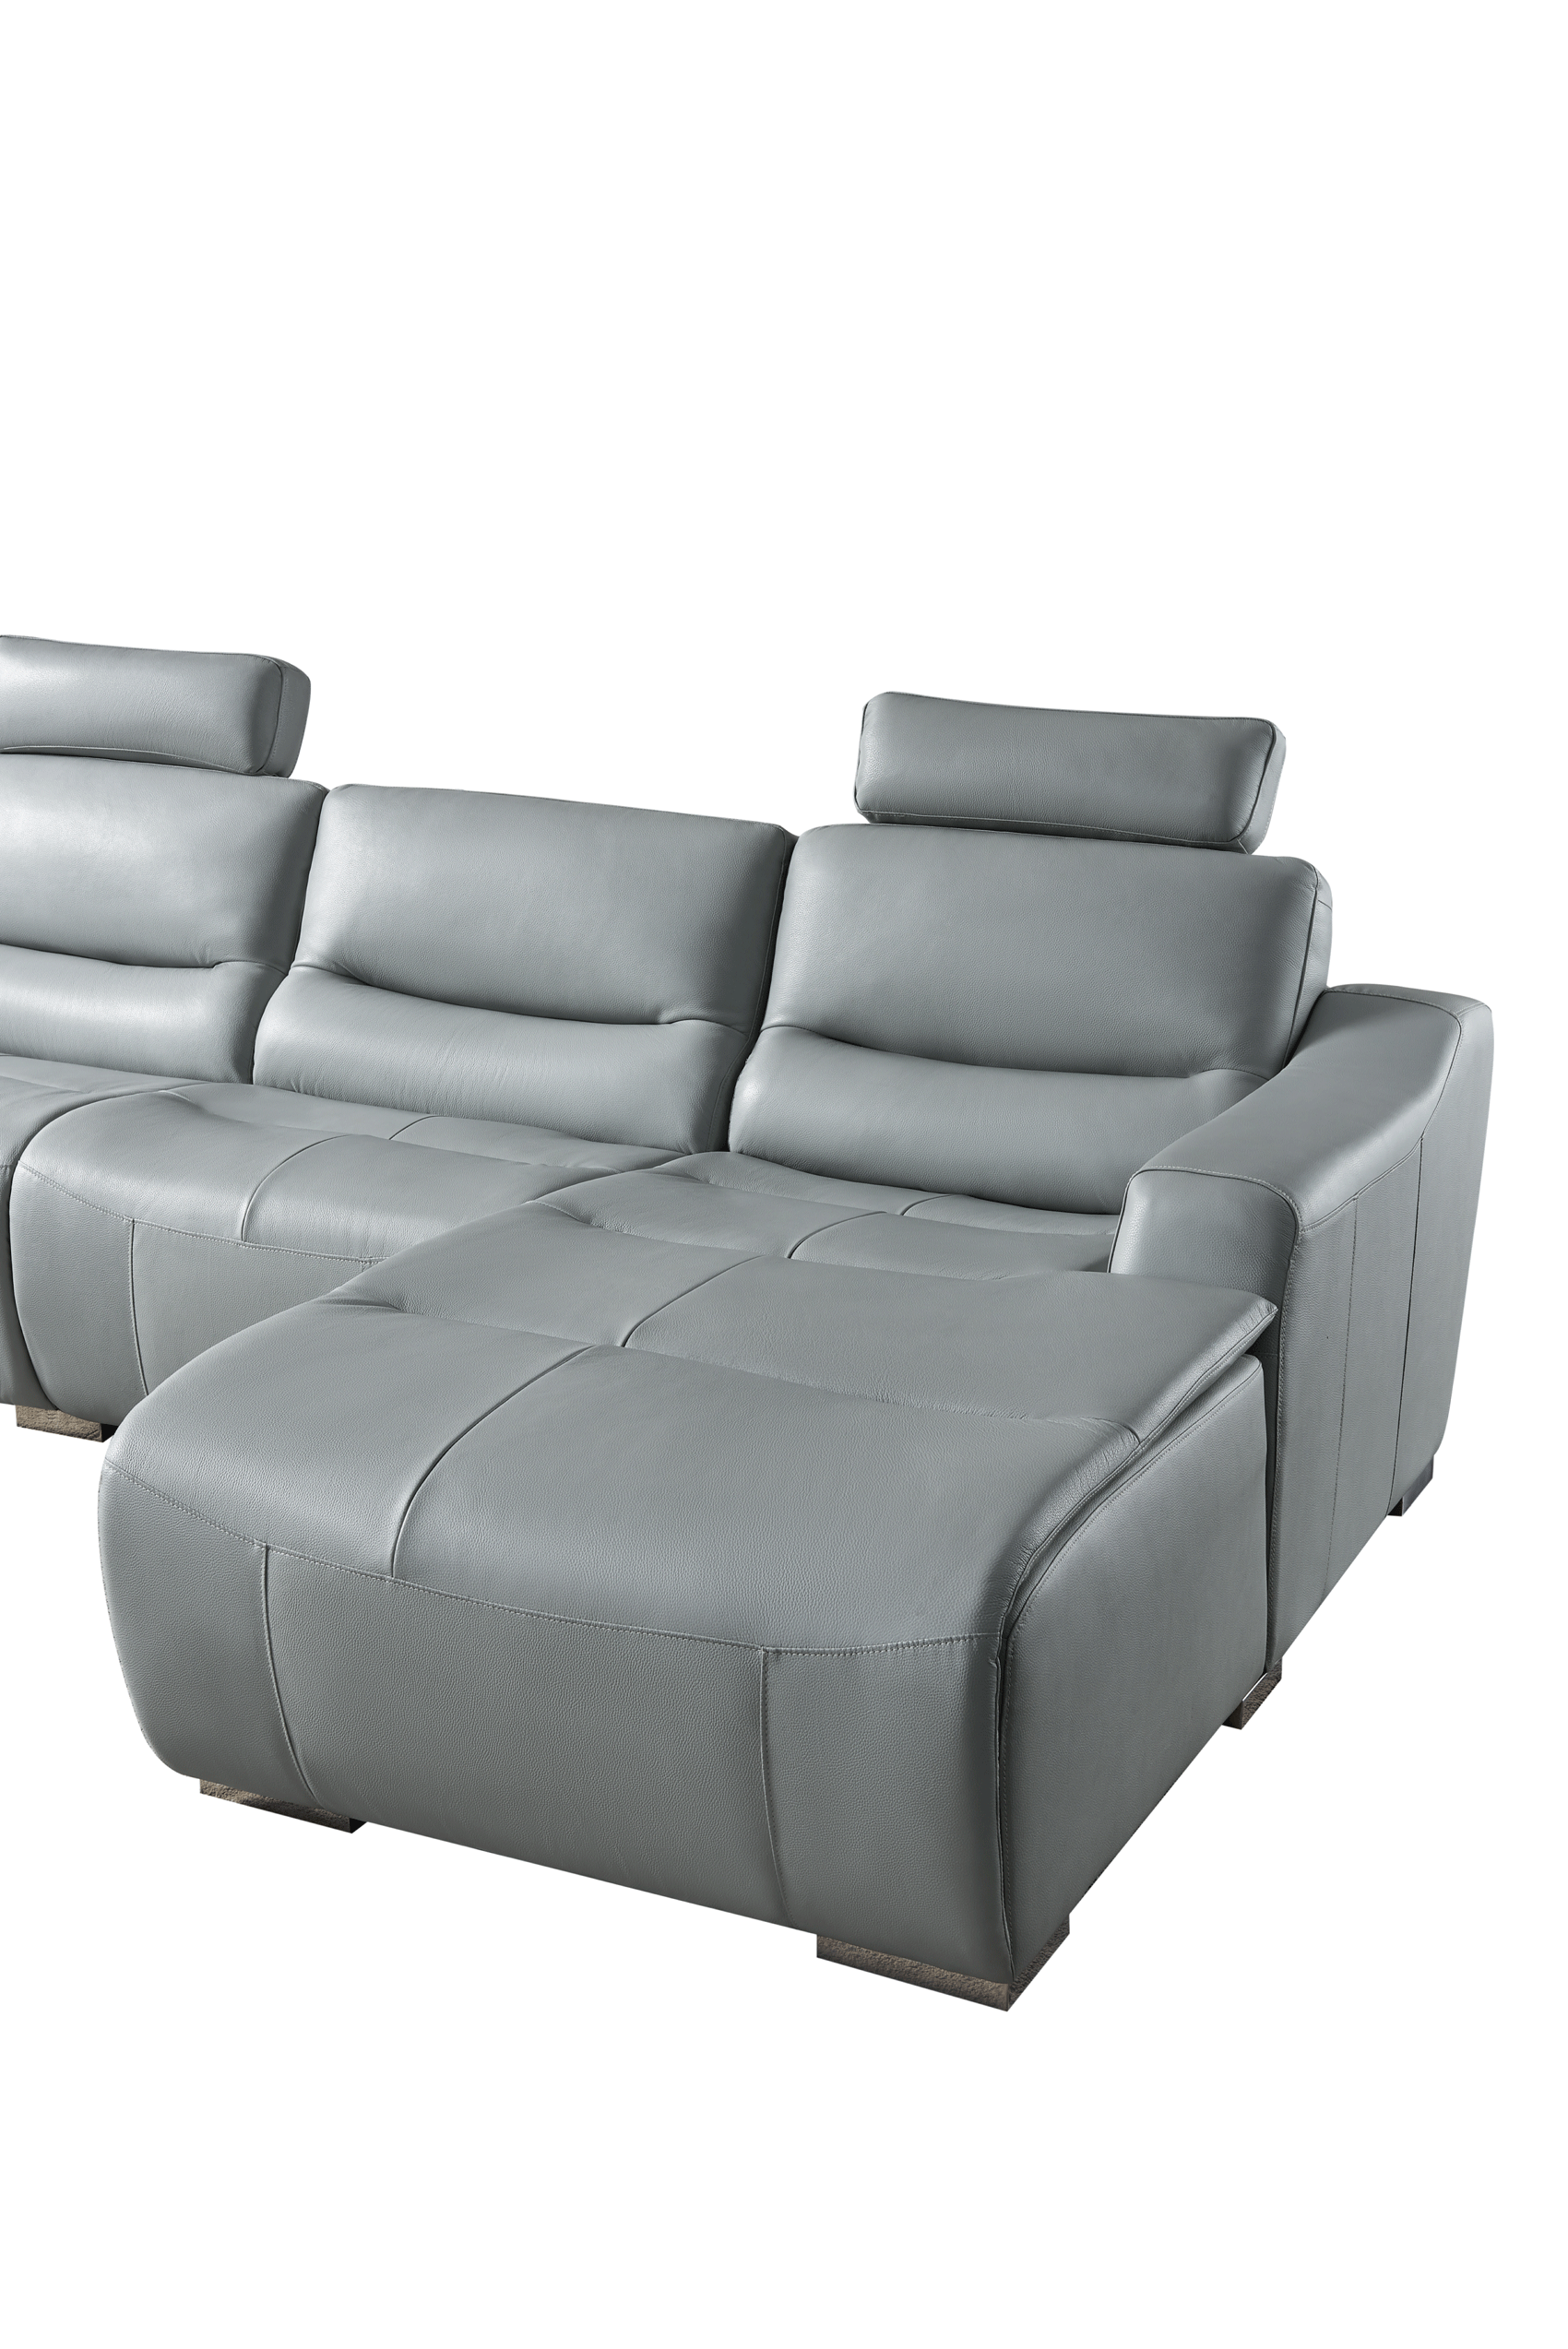 Modern Sectional Sofa Recliner Leather Gray Ef 144 5 